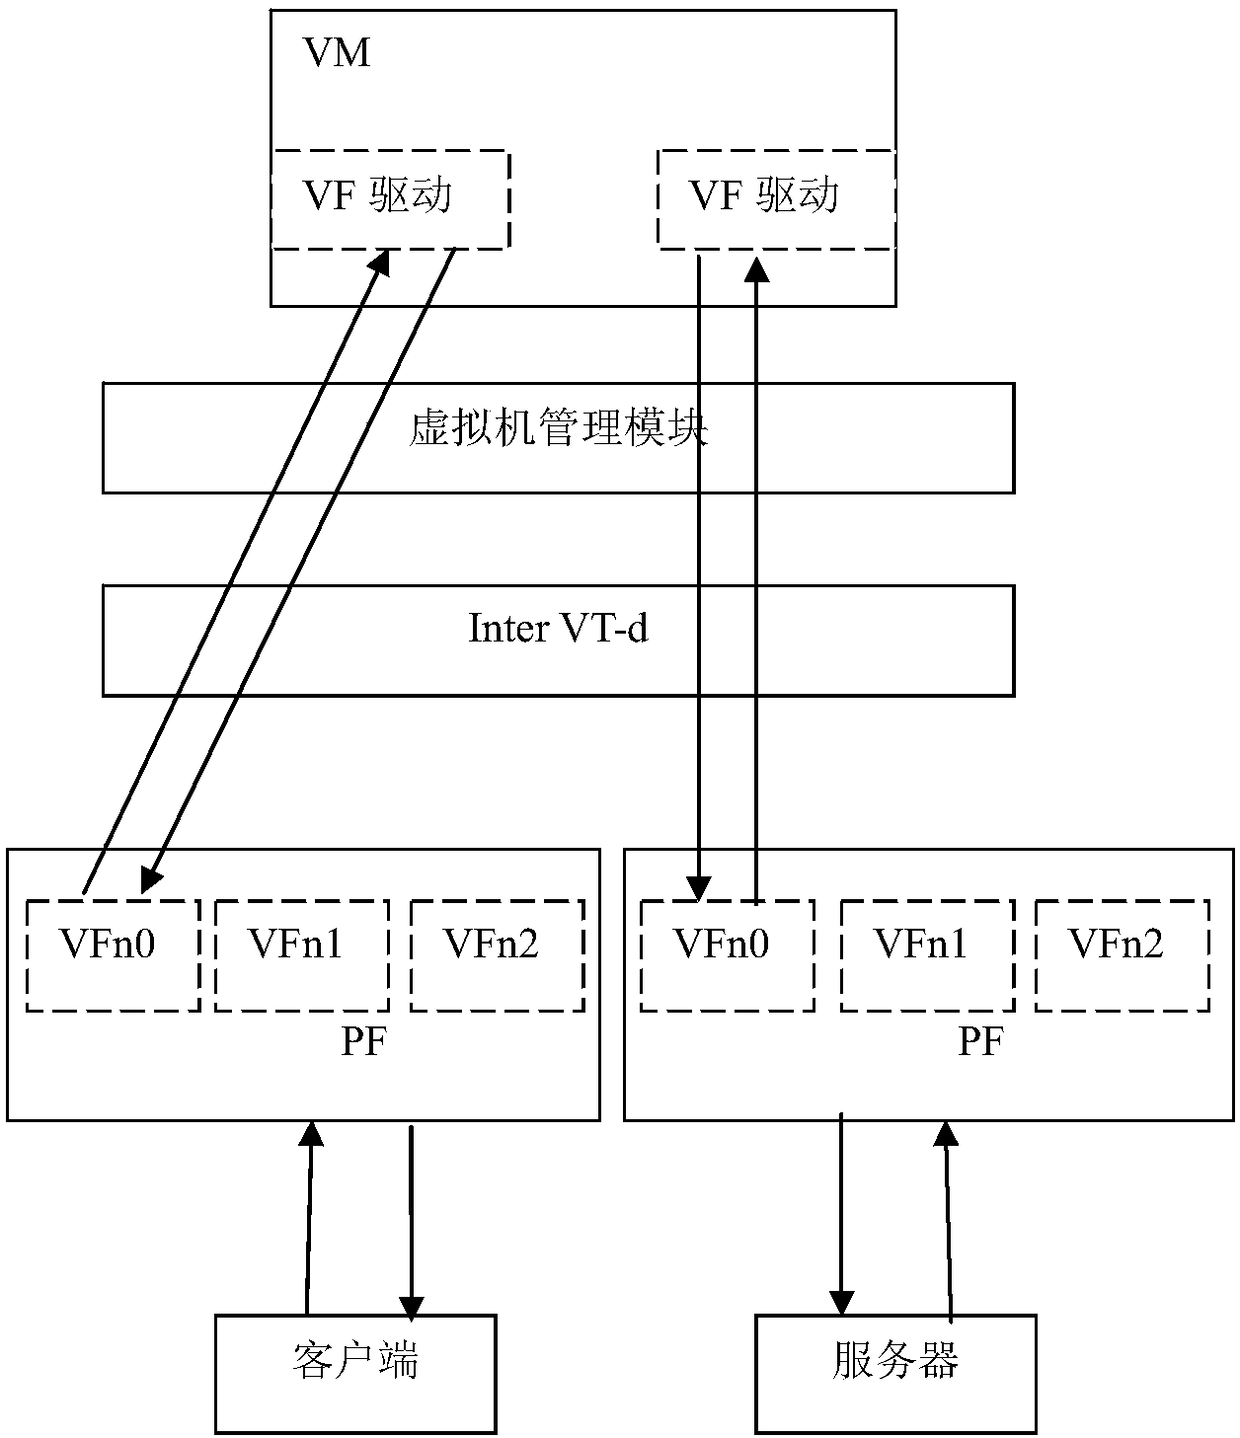 Bridging method based on VF promiscuous mode and bridging system